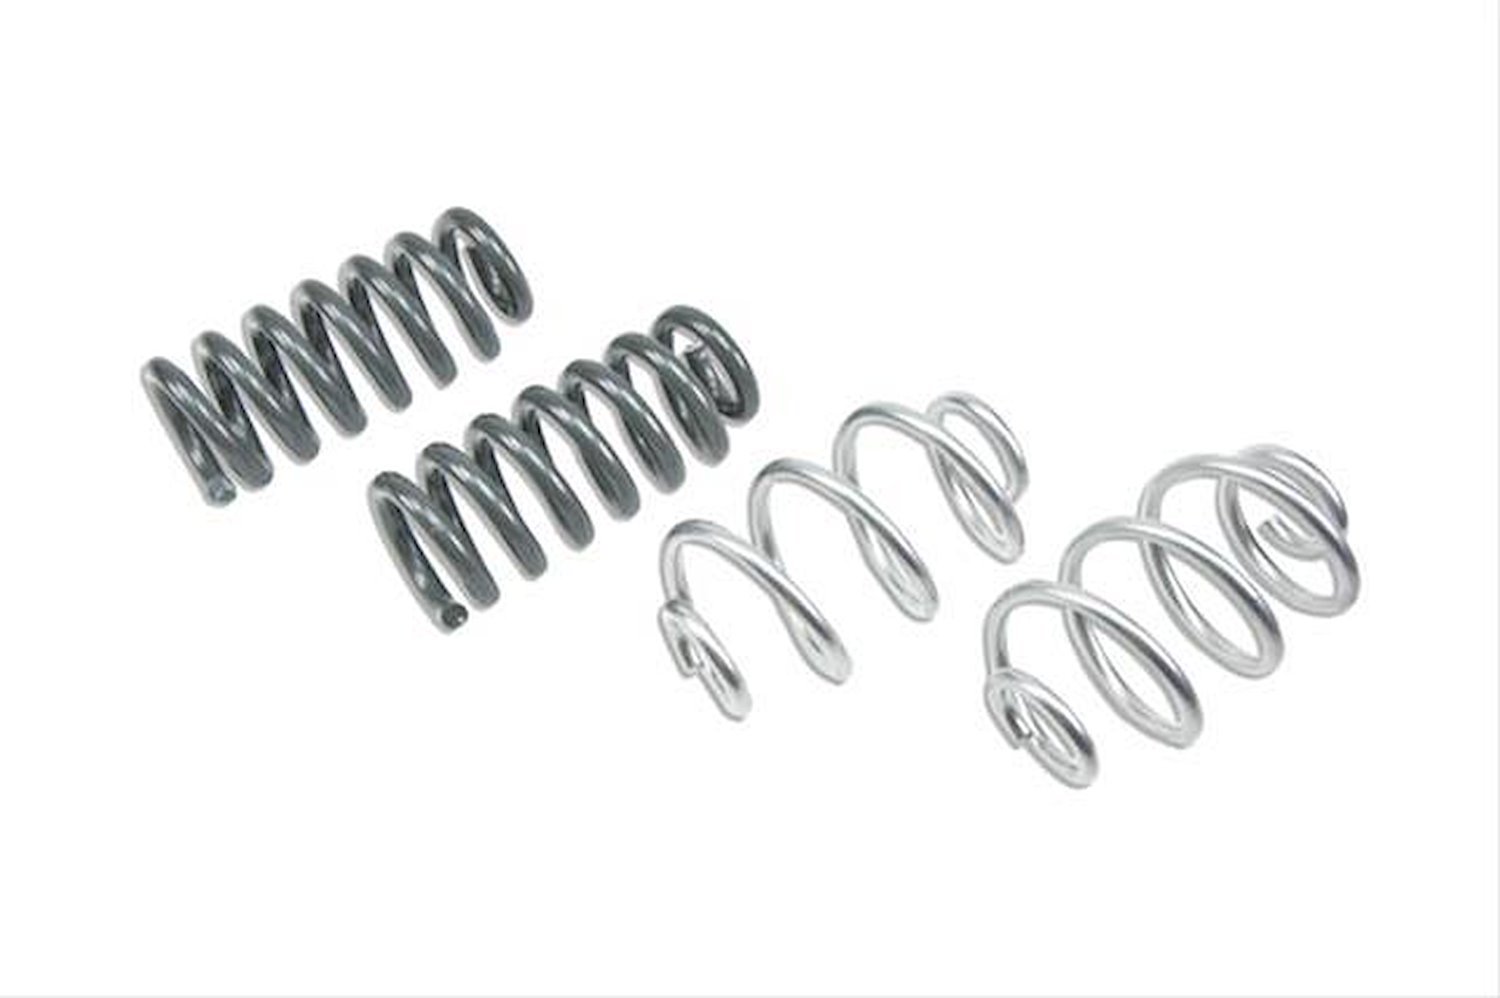 Complete Lowering Kit for 1963-1972 Chevy C10/GMC C15